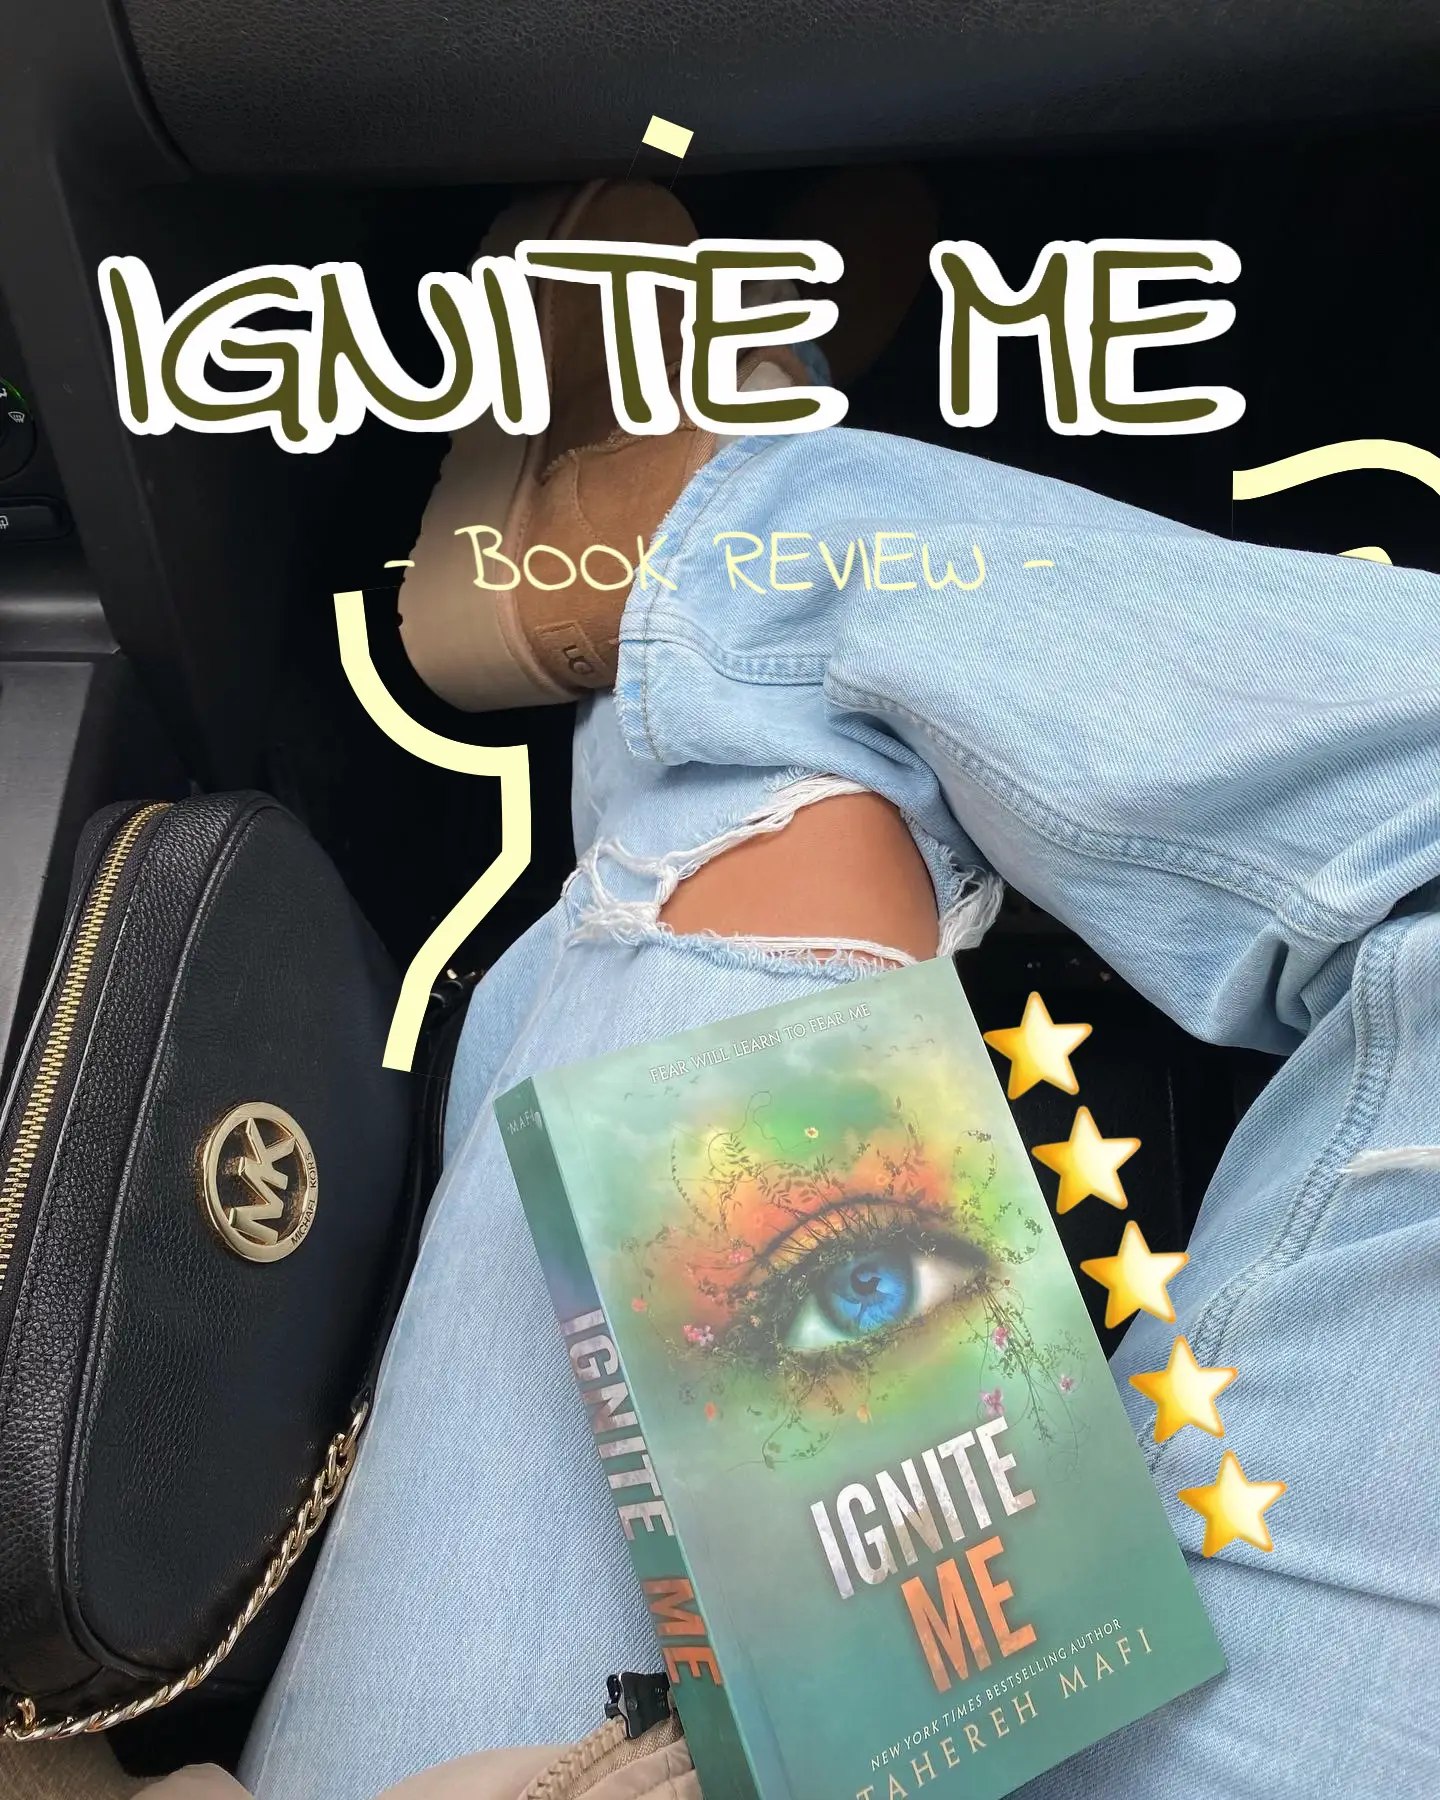 💥A Review of Shatter Me by Tahereh Mafi 💥, by Jennifer Machin